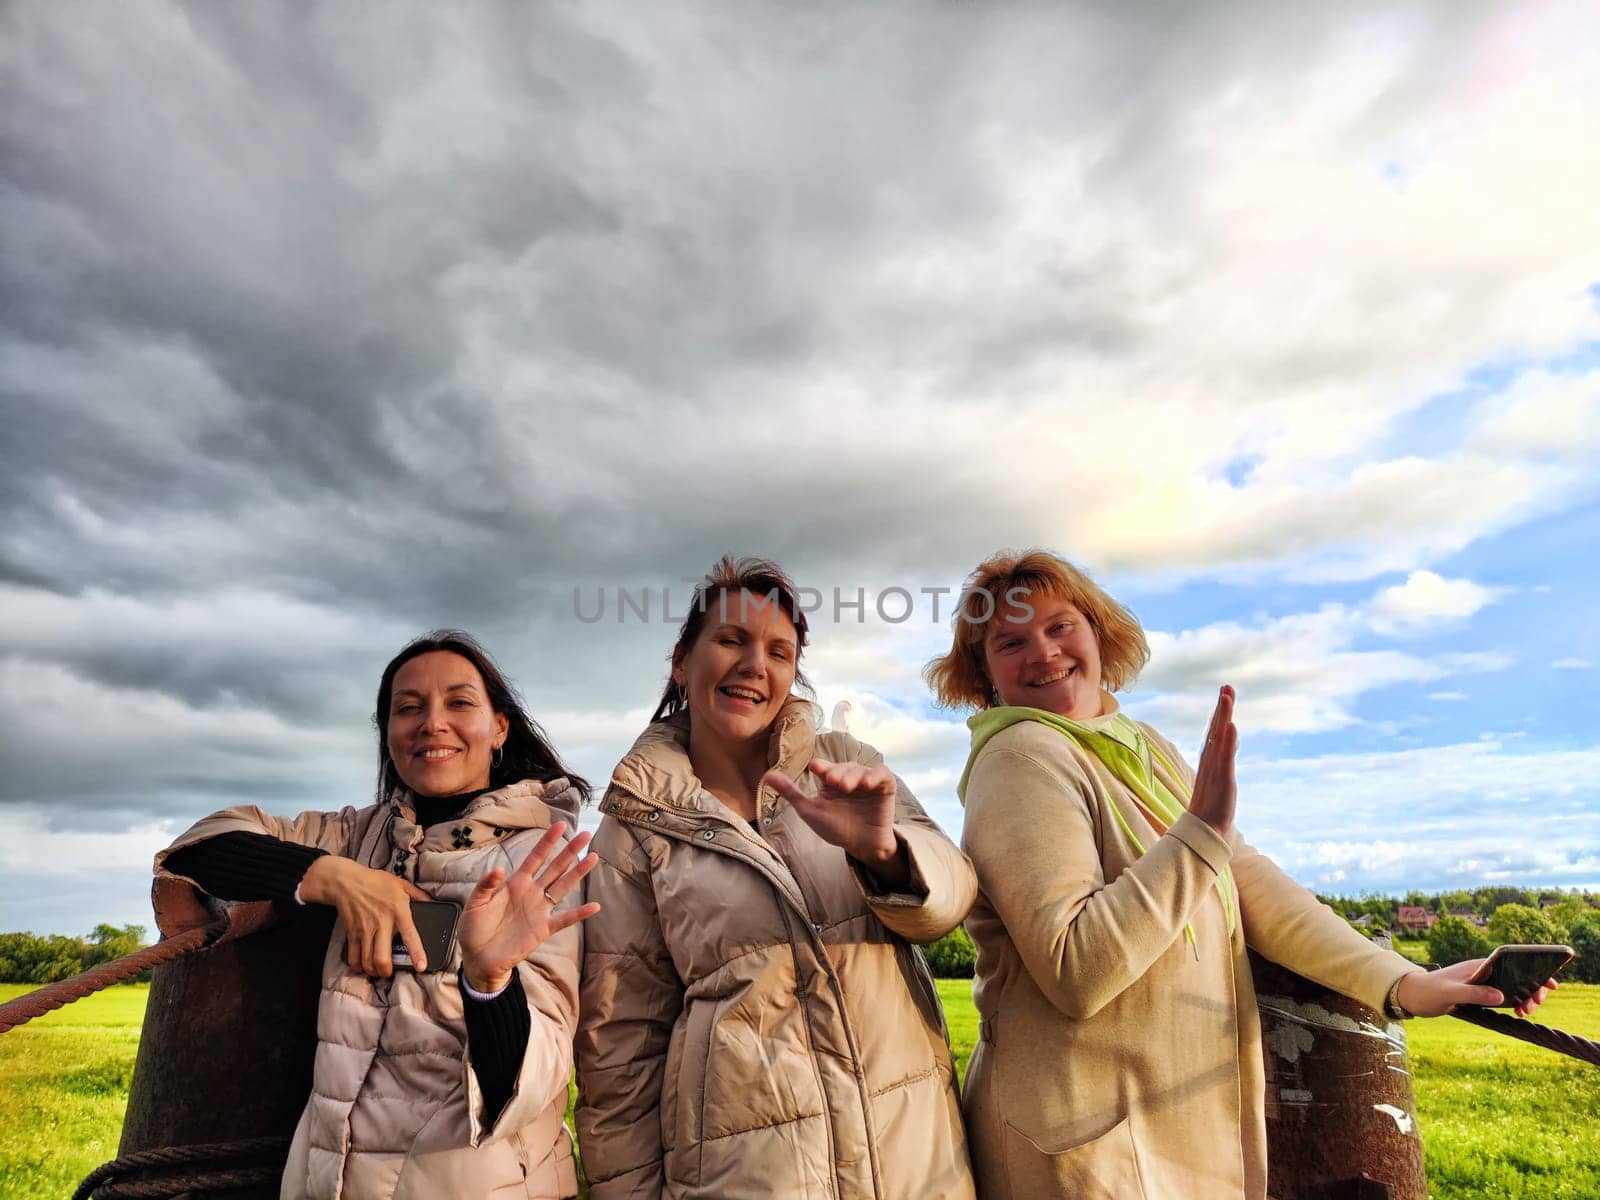 Three funny tourist girls on old bridge take selfies against the background of an alarming dramatic sky with thunderclouds. Middle-aged women having fun outdoors